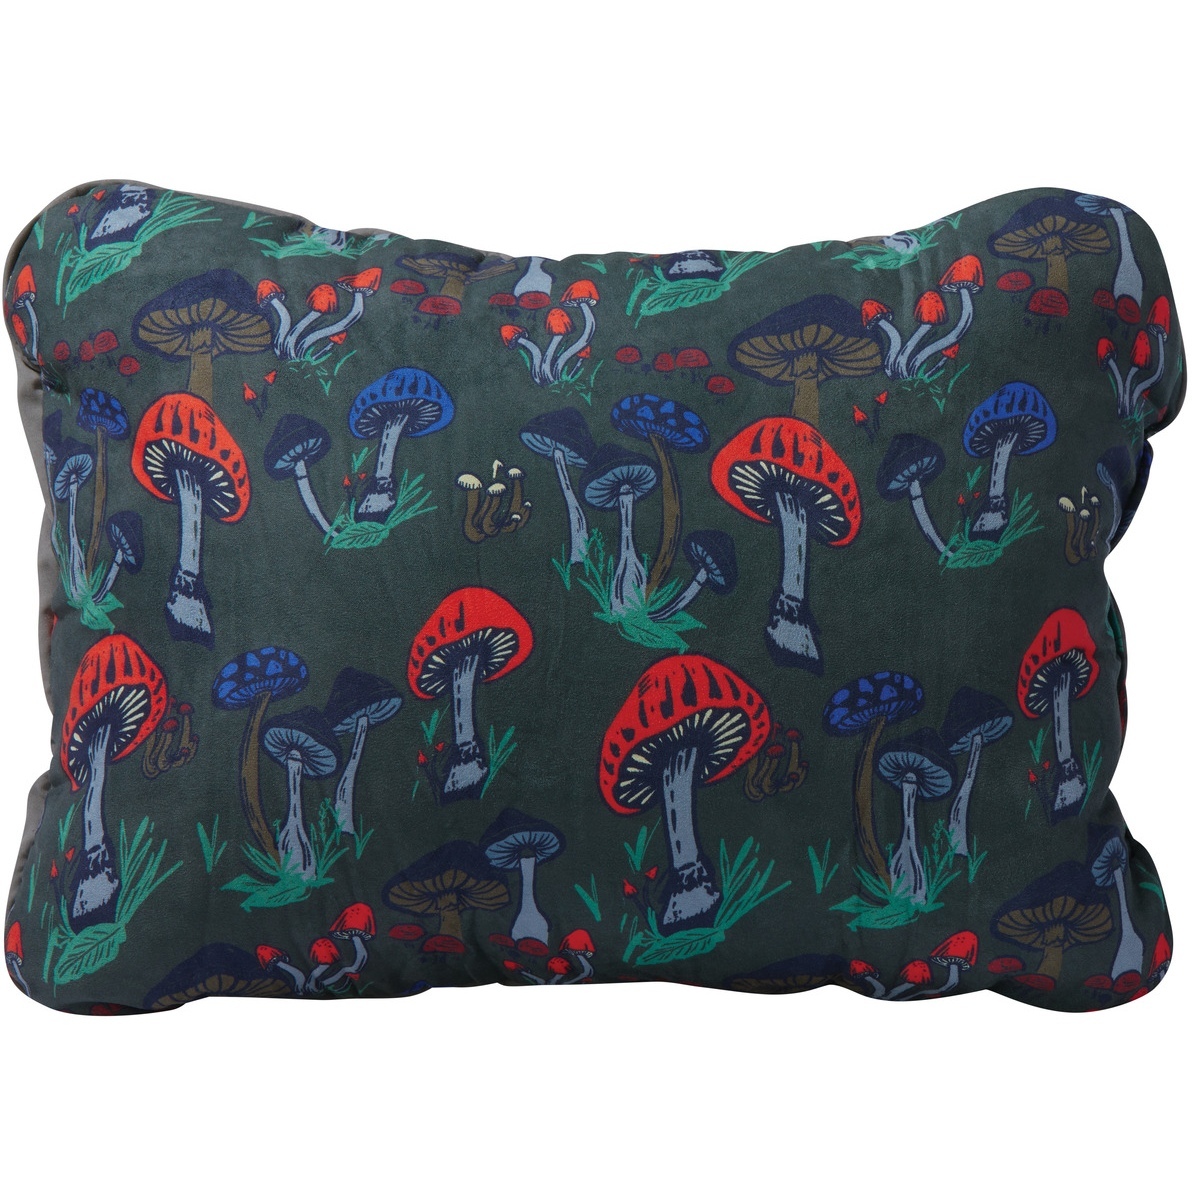 Picture of Therm-a-Rest Compressible PillowCinch R - Fun Guy Print